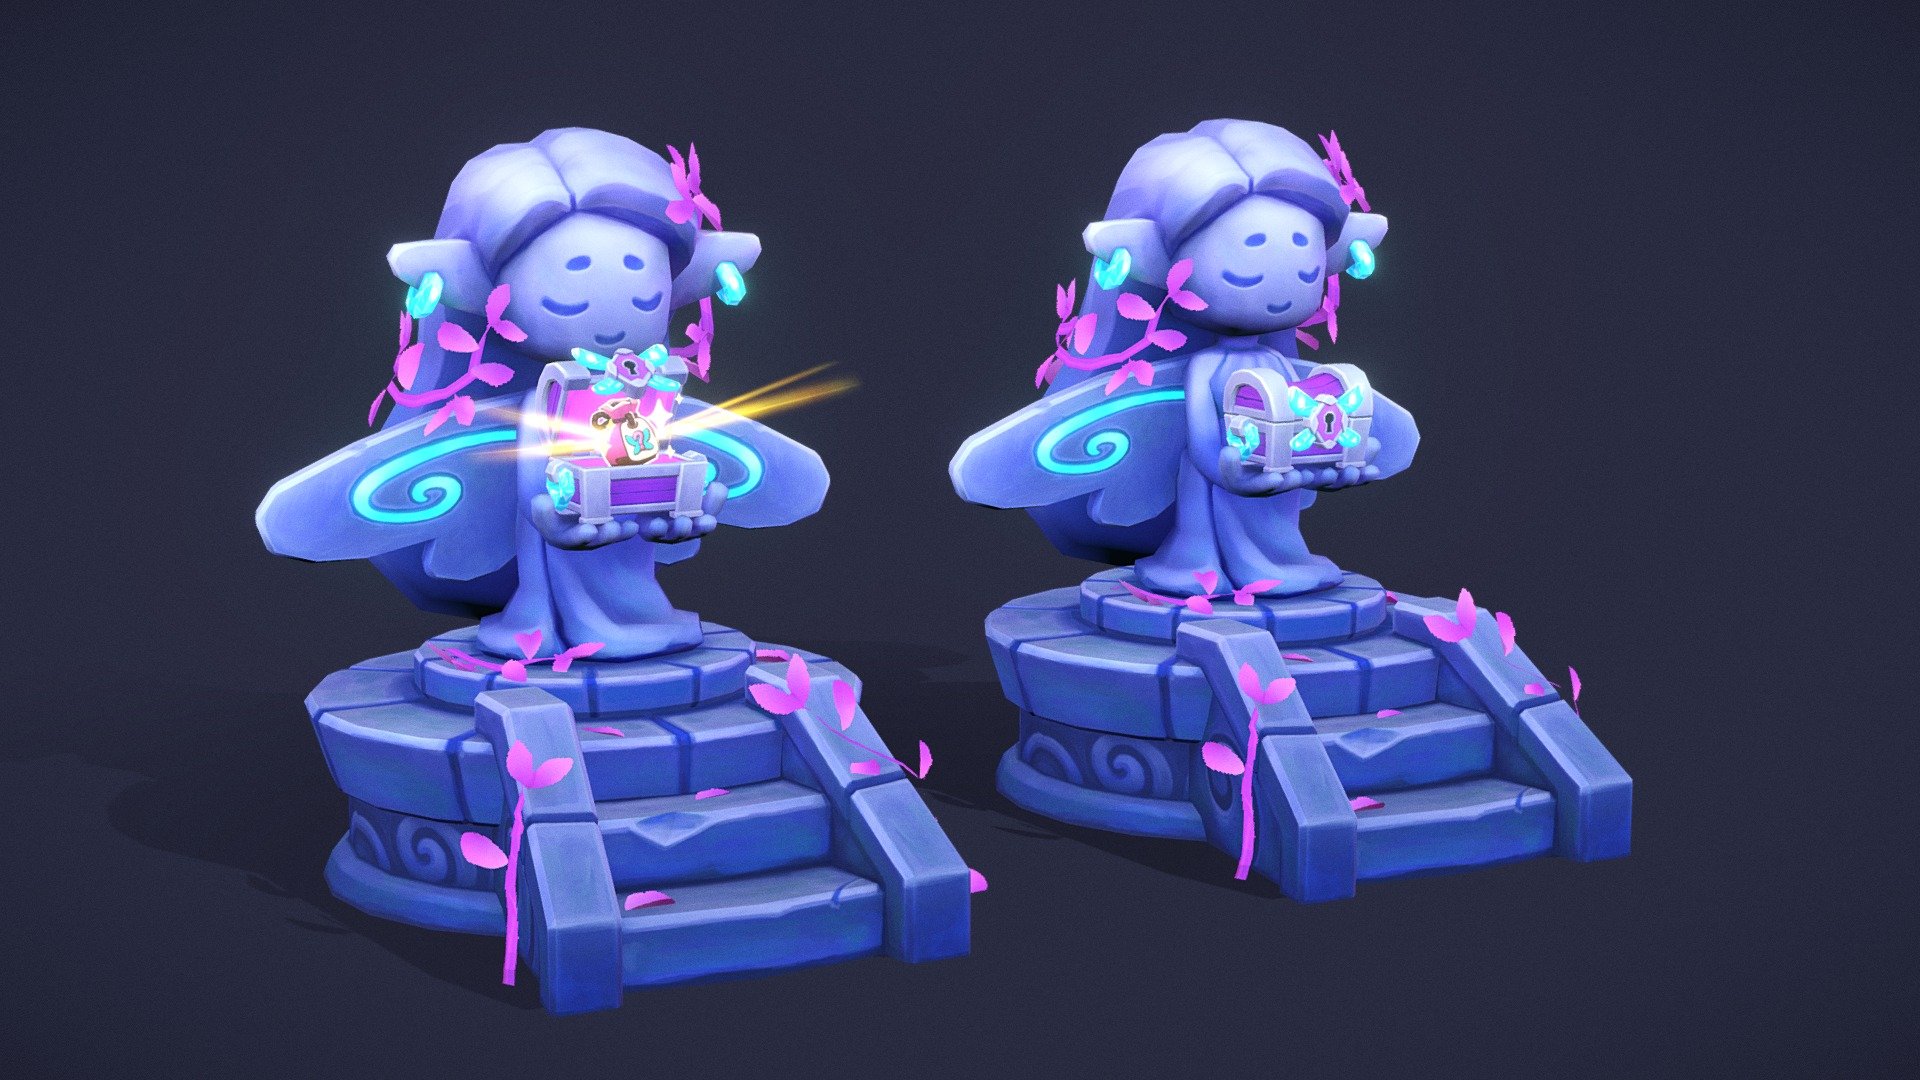 Fae Farm Inspired Game Ready Asset. I love the game! - Stylized Statue with Treasure Chest - 3D model by pkelen 3d model